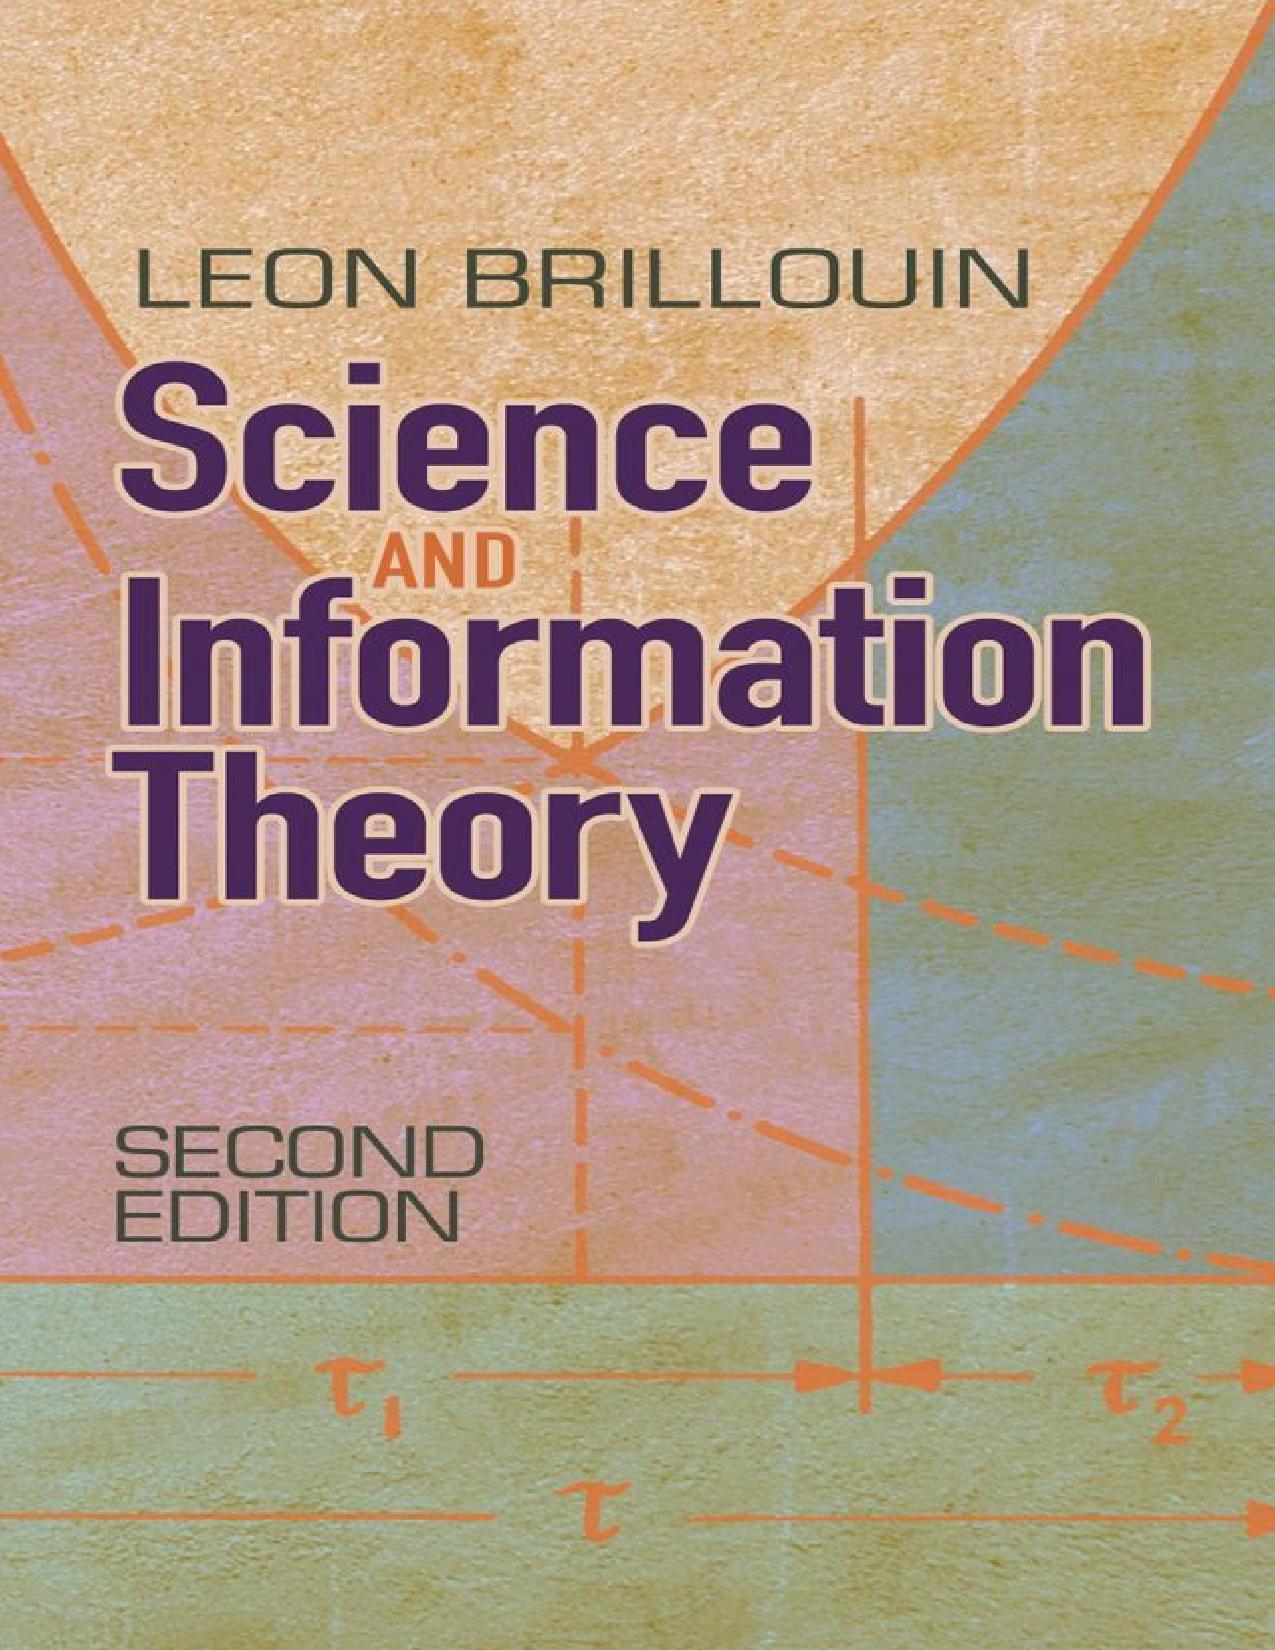 brillouin science and information theory pdf to jpg